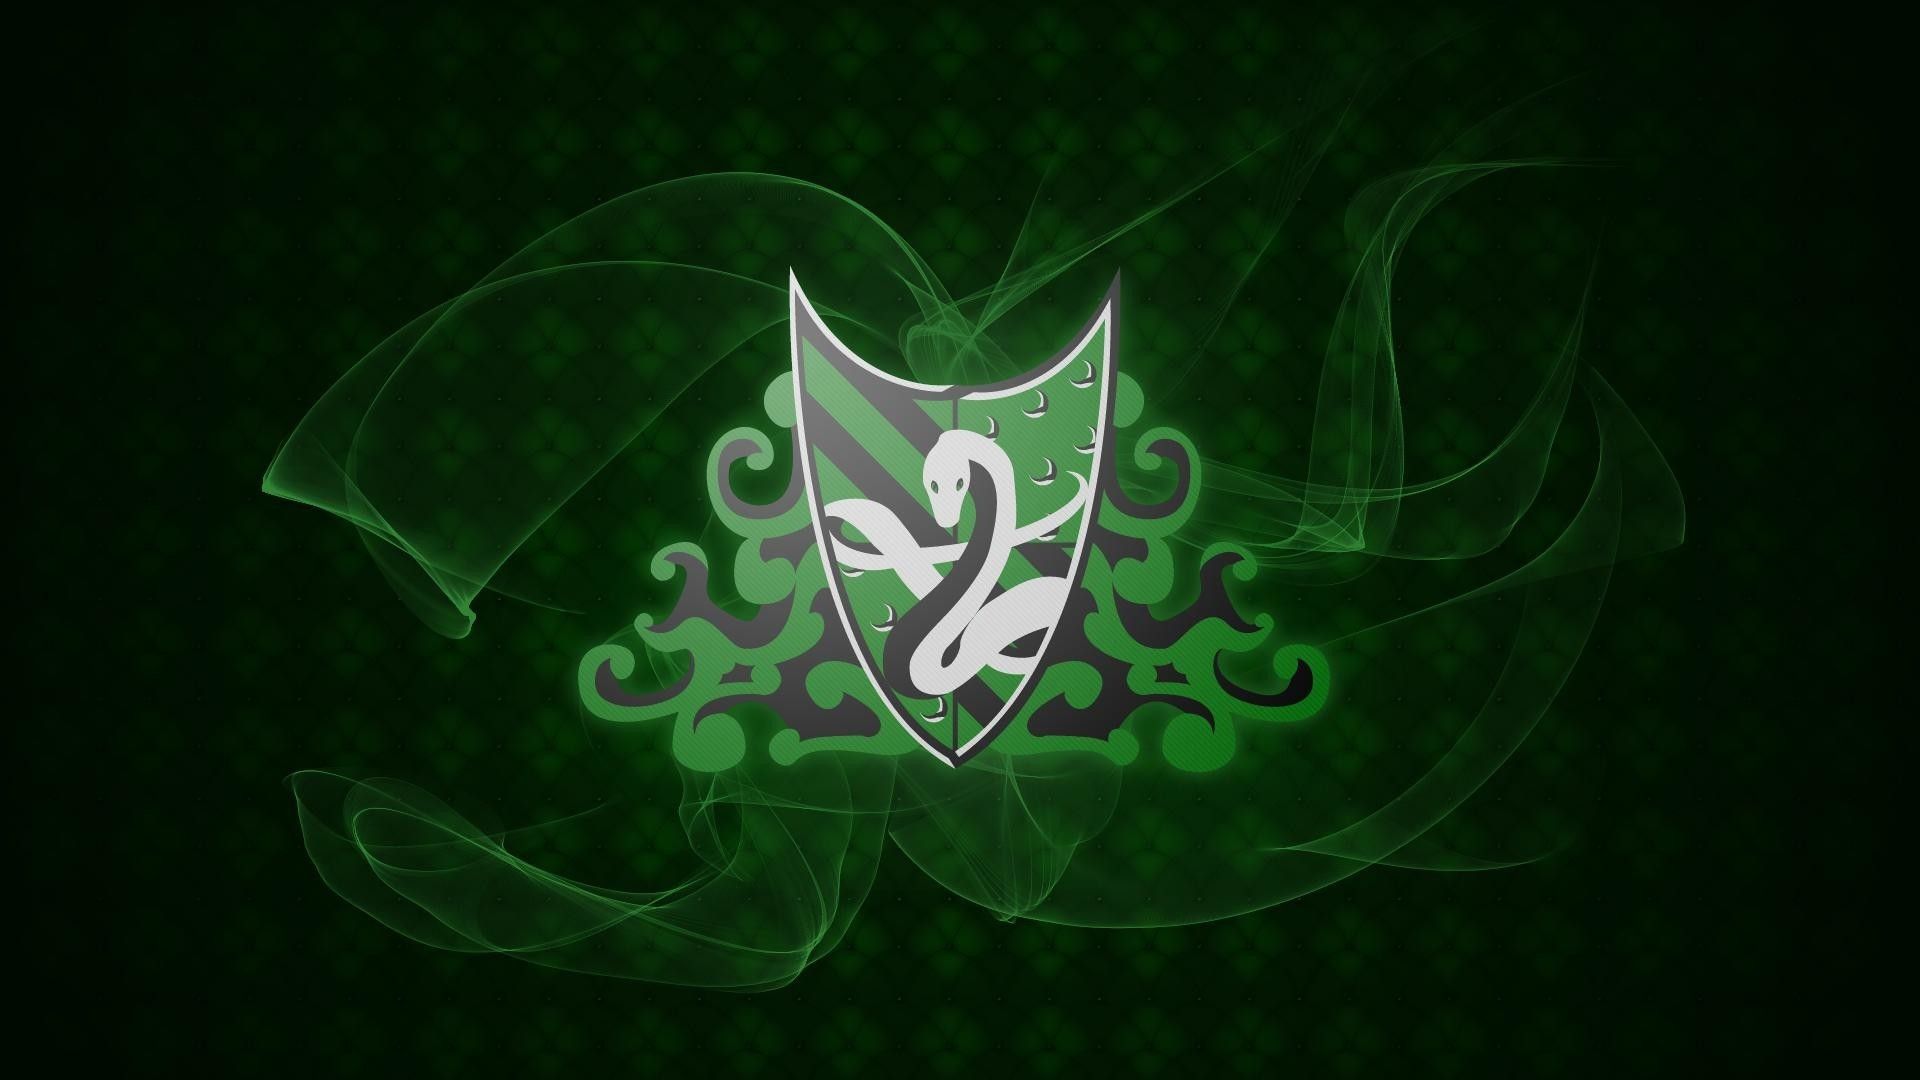 Slytherin Wallpaper background picture. Slytherin wallpaper, Background picture, Slytherin